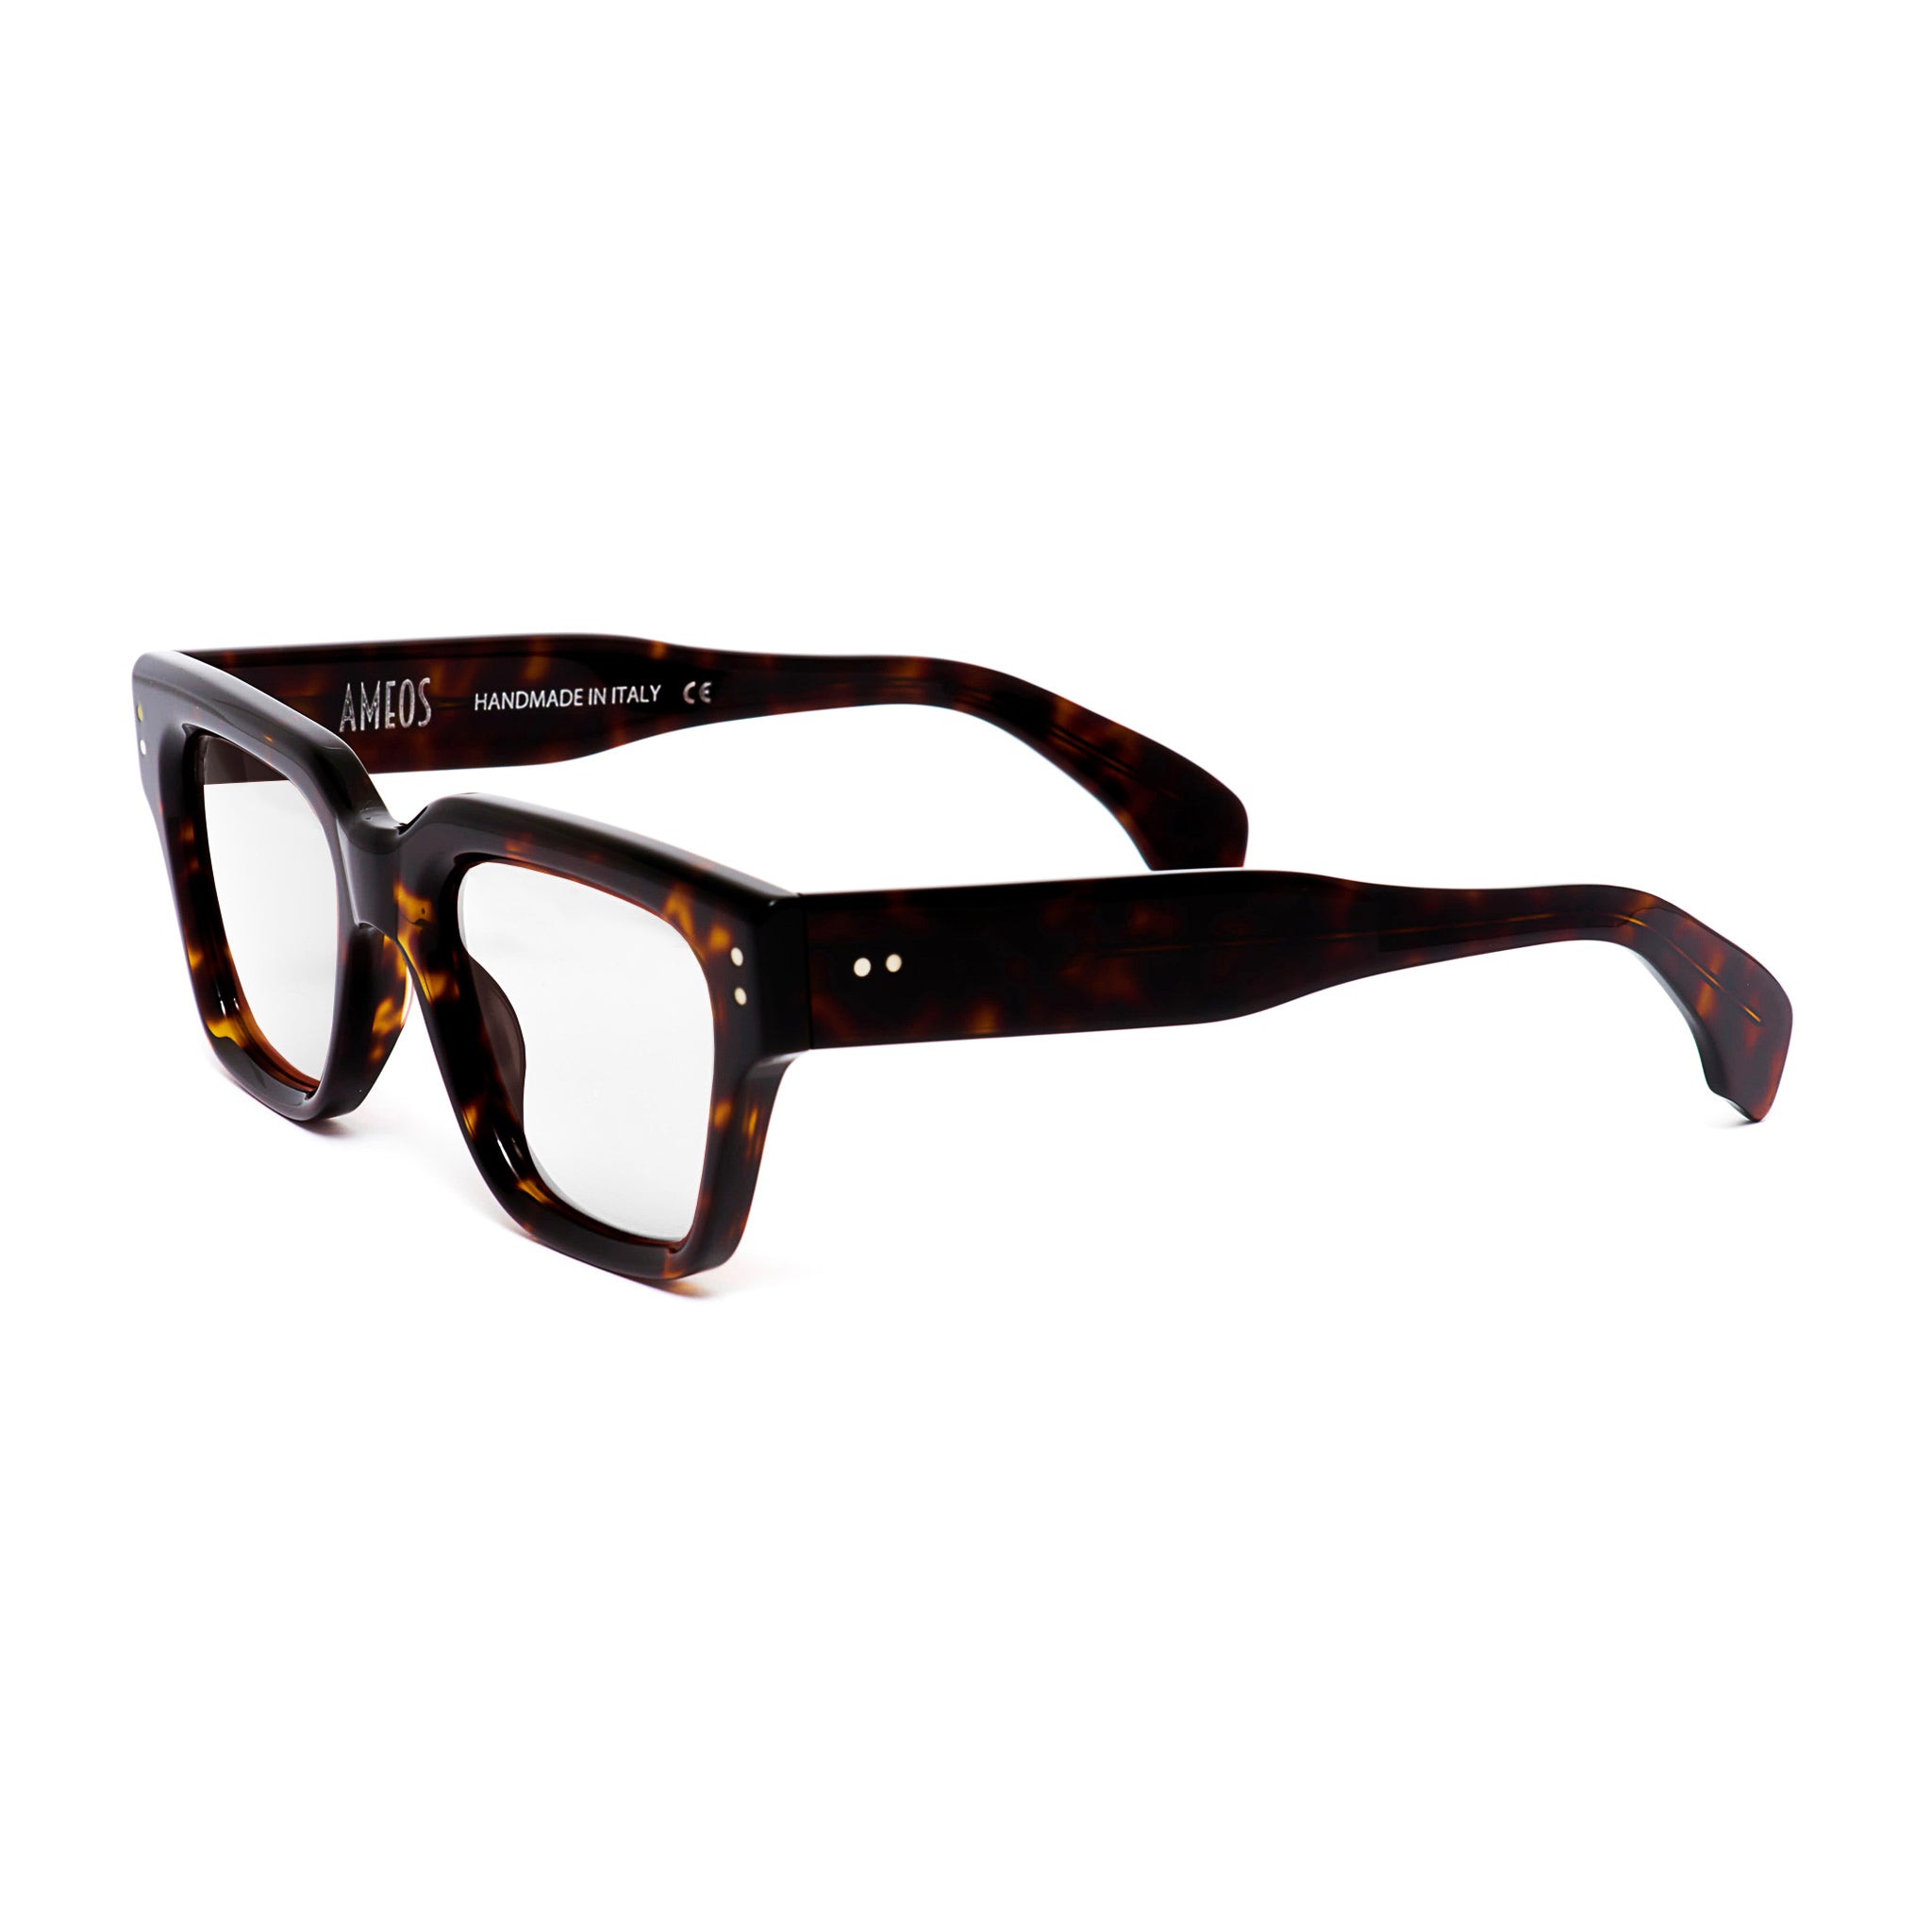 Ameos eyewear optical glasses robyn in tortoise frames. Unisex and handmade in Italy.